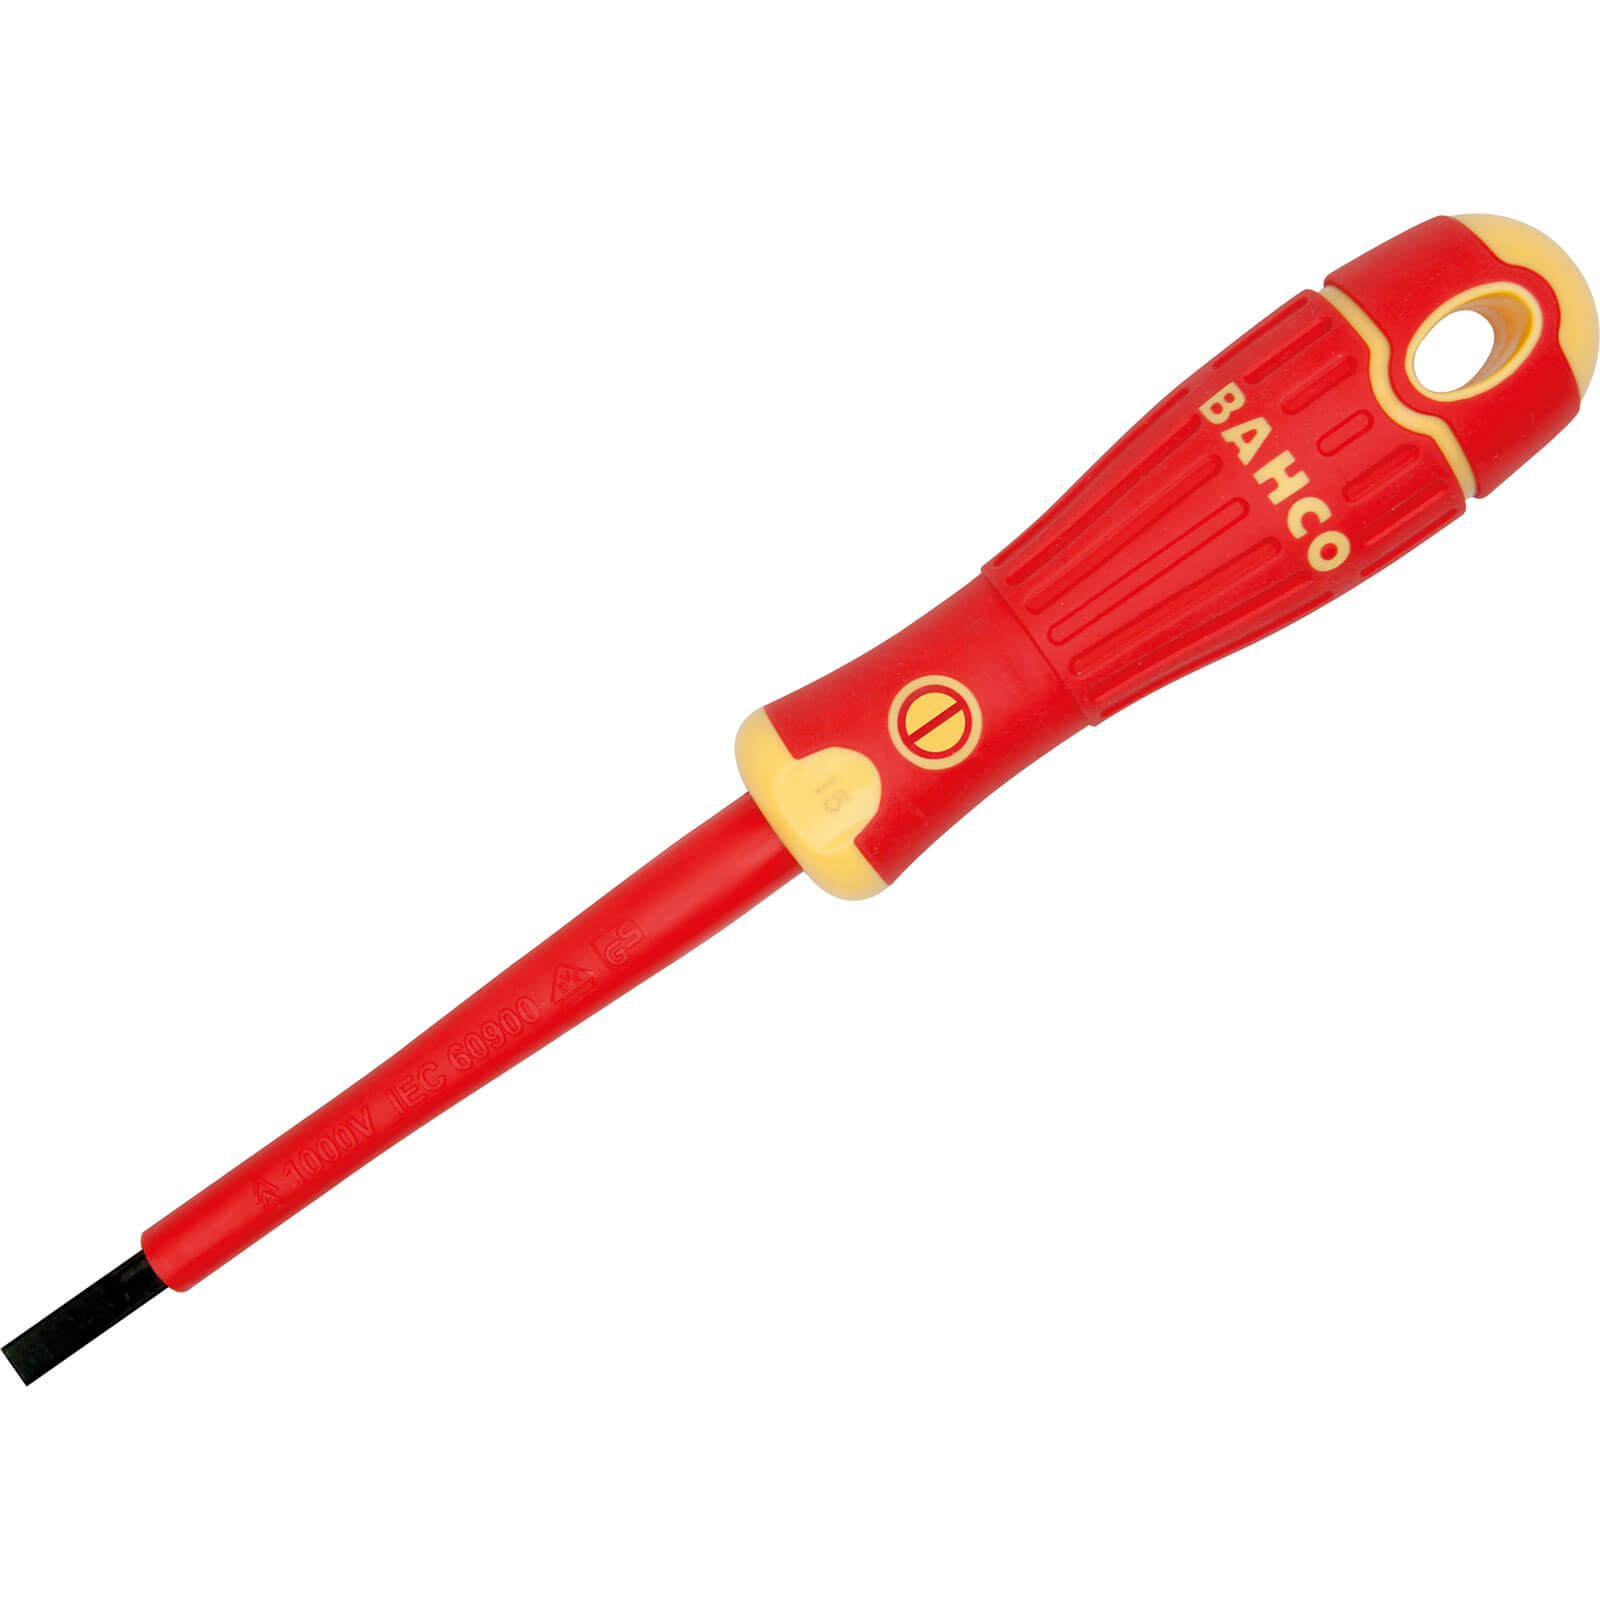 Photo of Bahco Vde Insulated Slotted Screwdriver 3mm 100mm